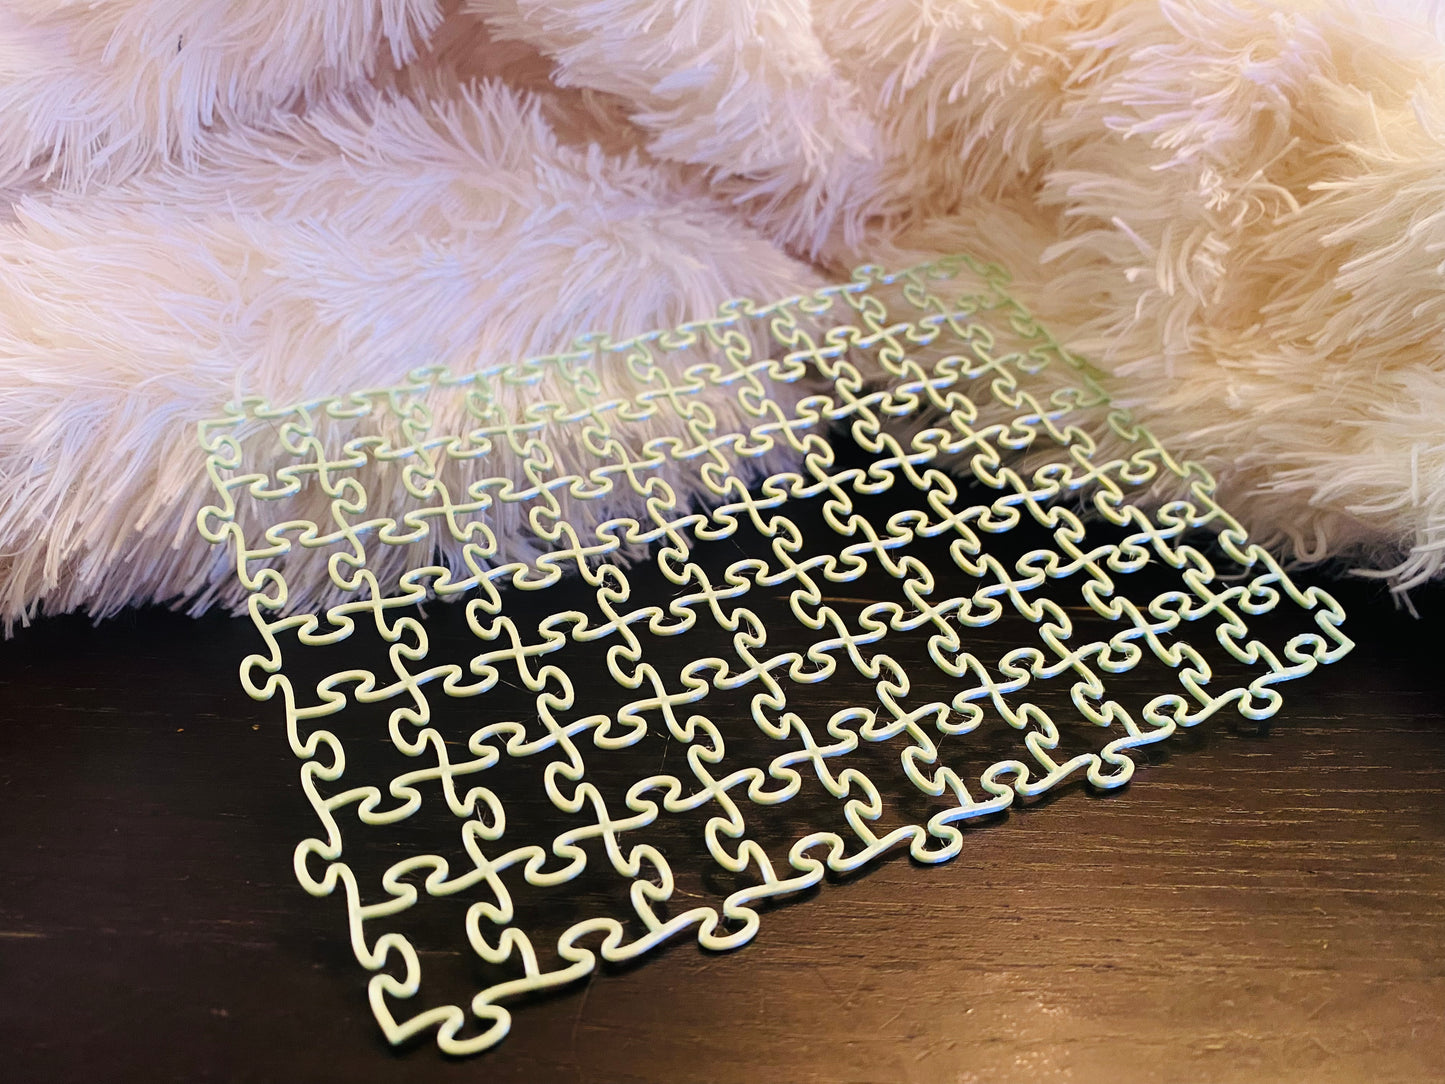 3D Printed 5"x7" Puzzle Piece Mesh Sheet - ShitVicMakes